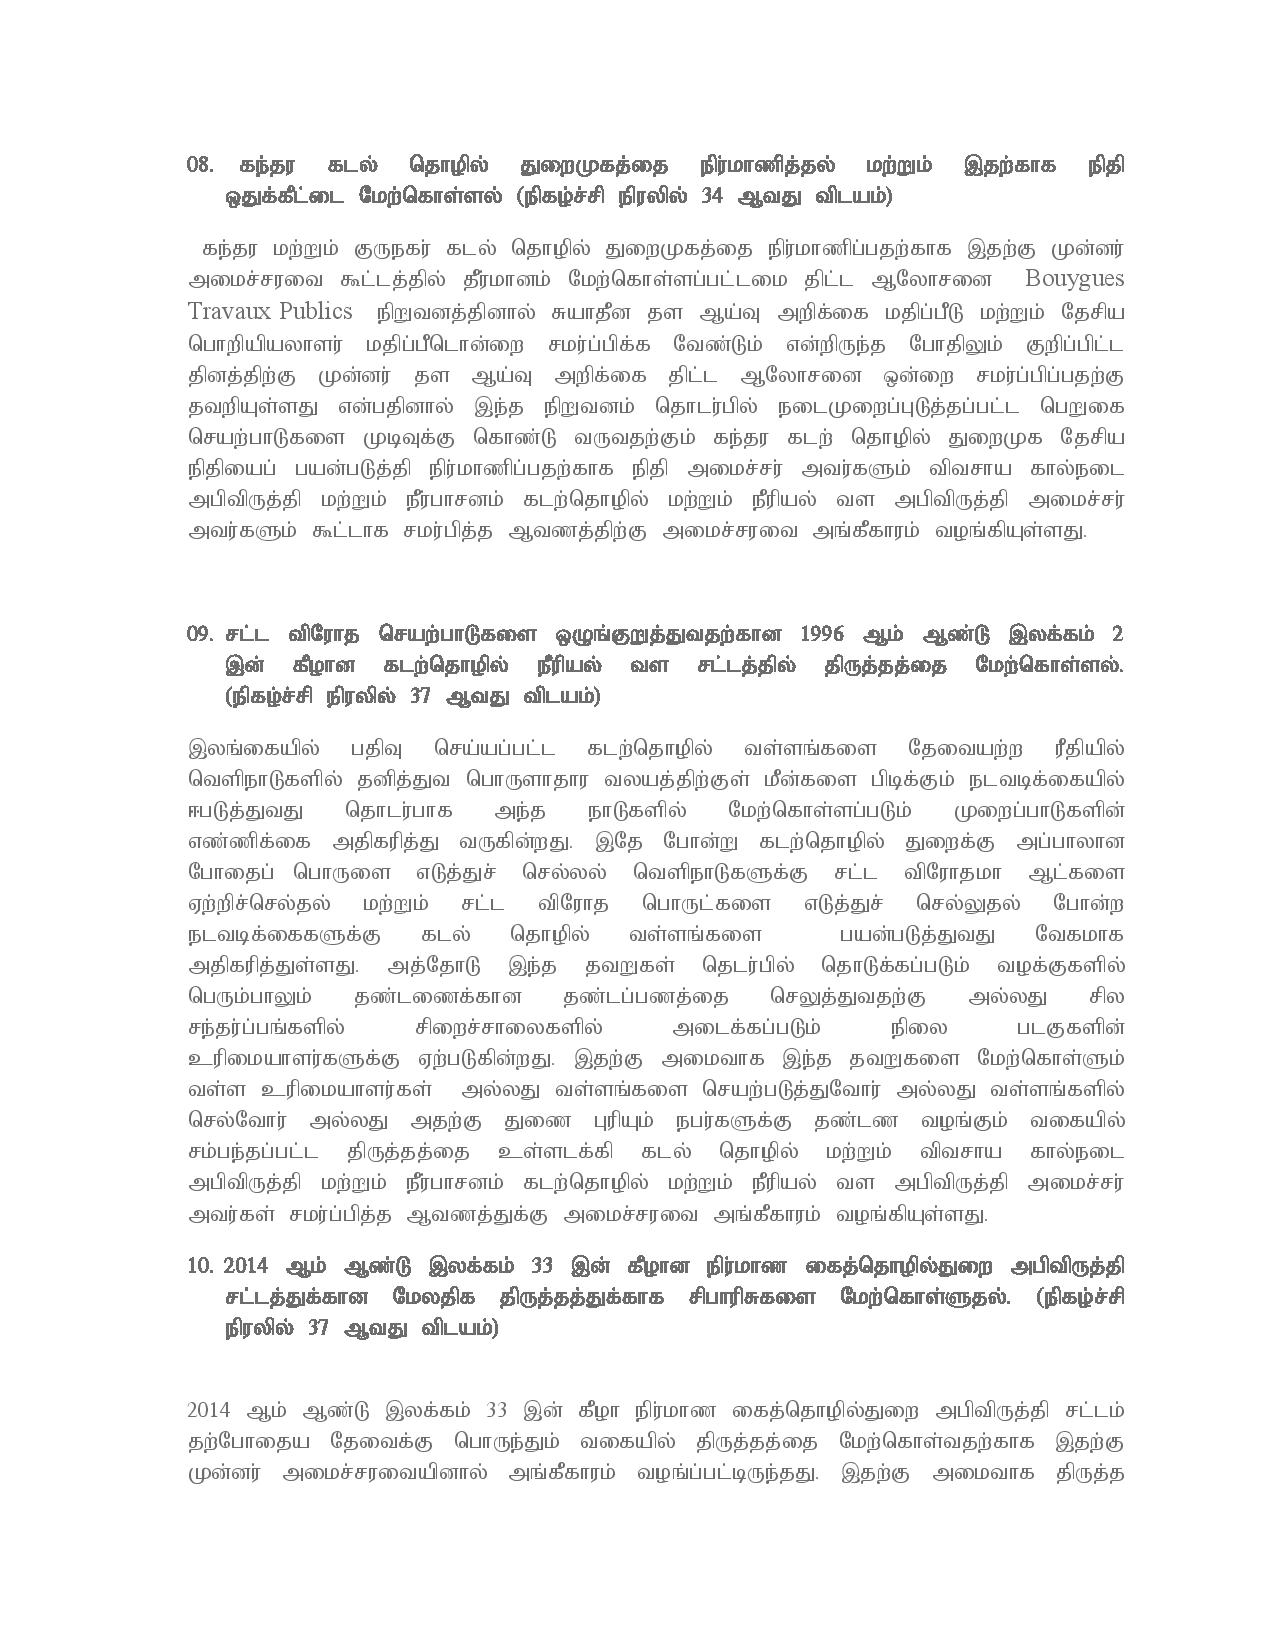 Taamil Cabinet 07.07.2019 1 page 004 Copy